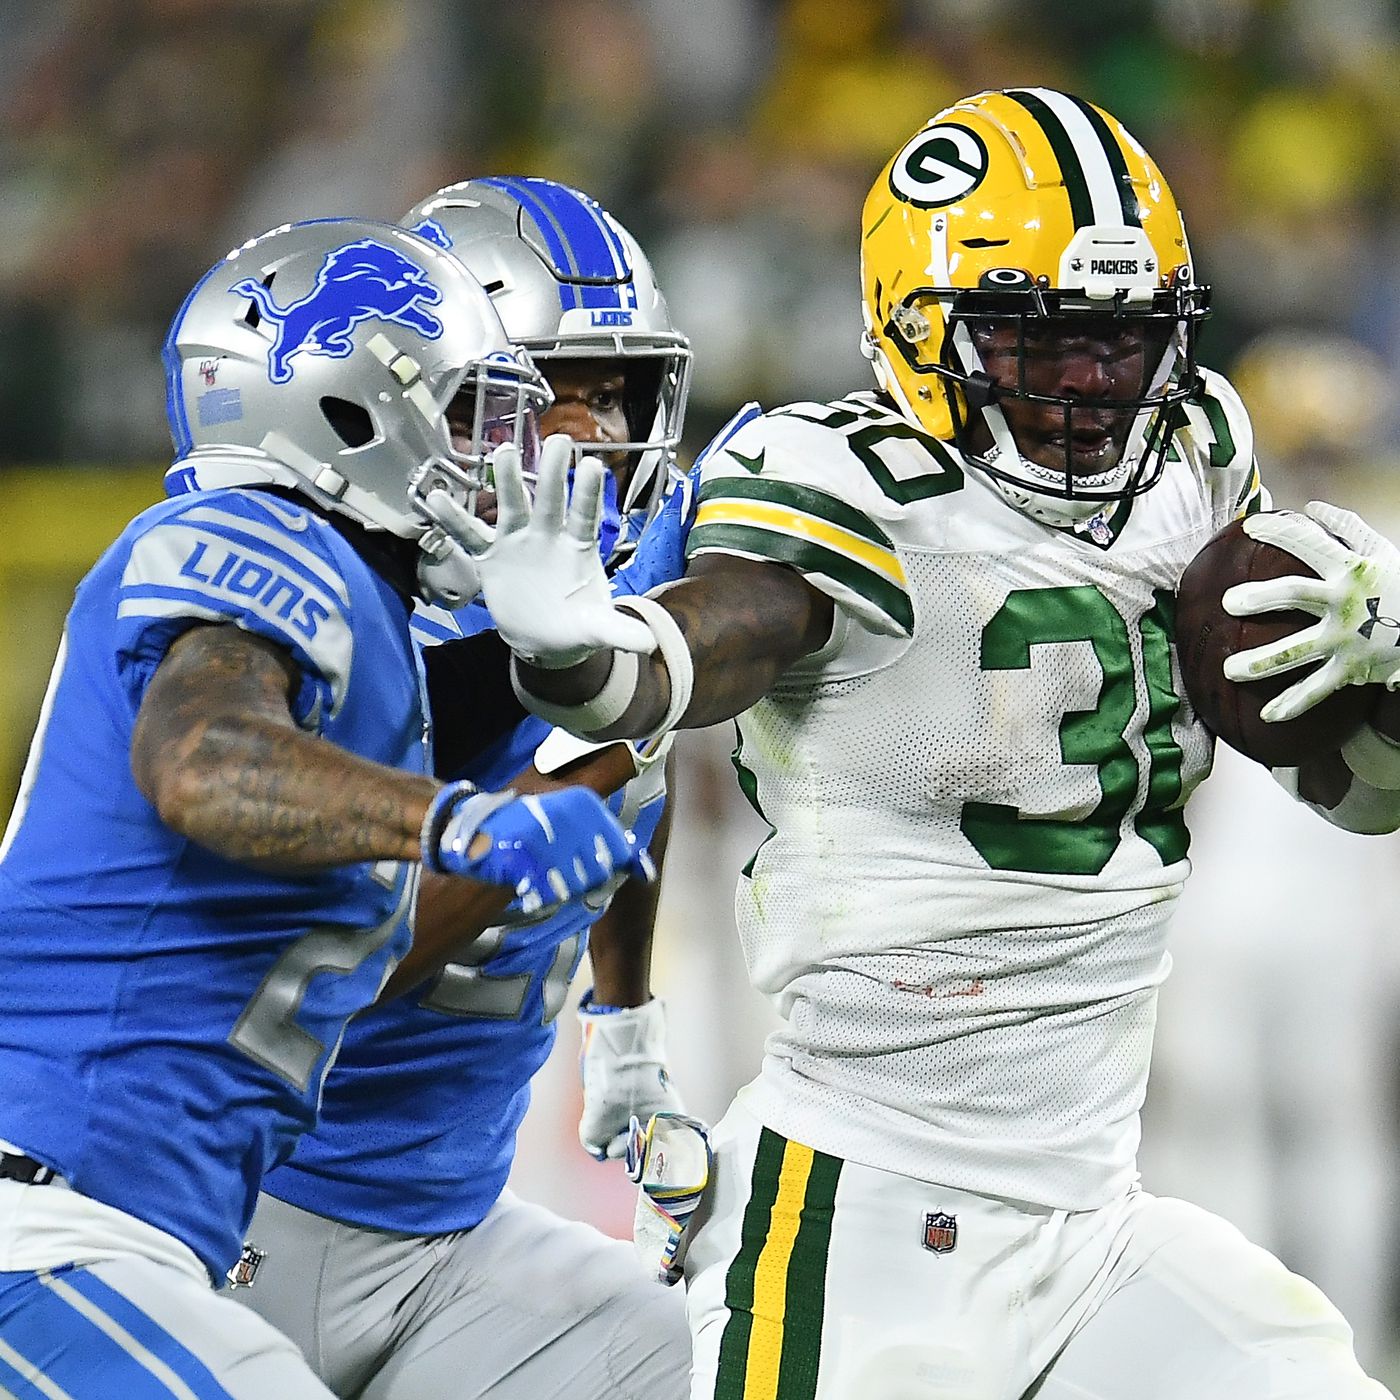 Lions Vs Packers Week 2 2021 How To Watch The Nfc North Battle On Monday Night Football - Acme Packing Company